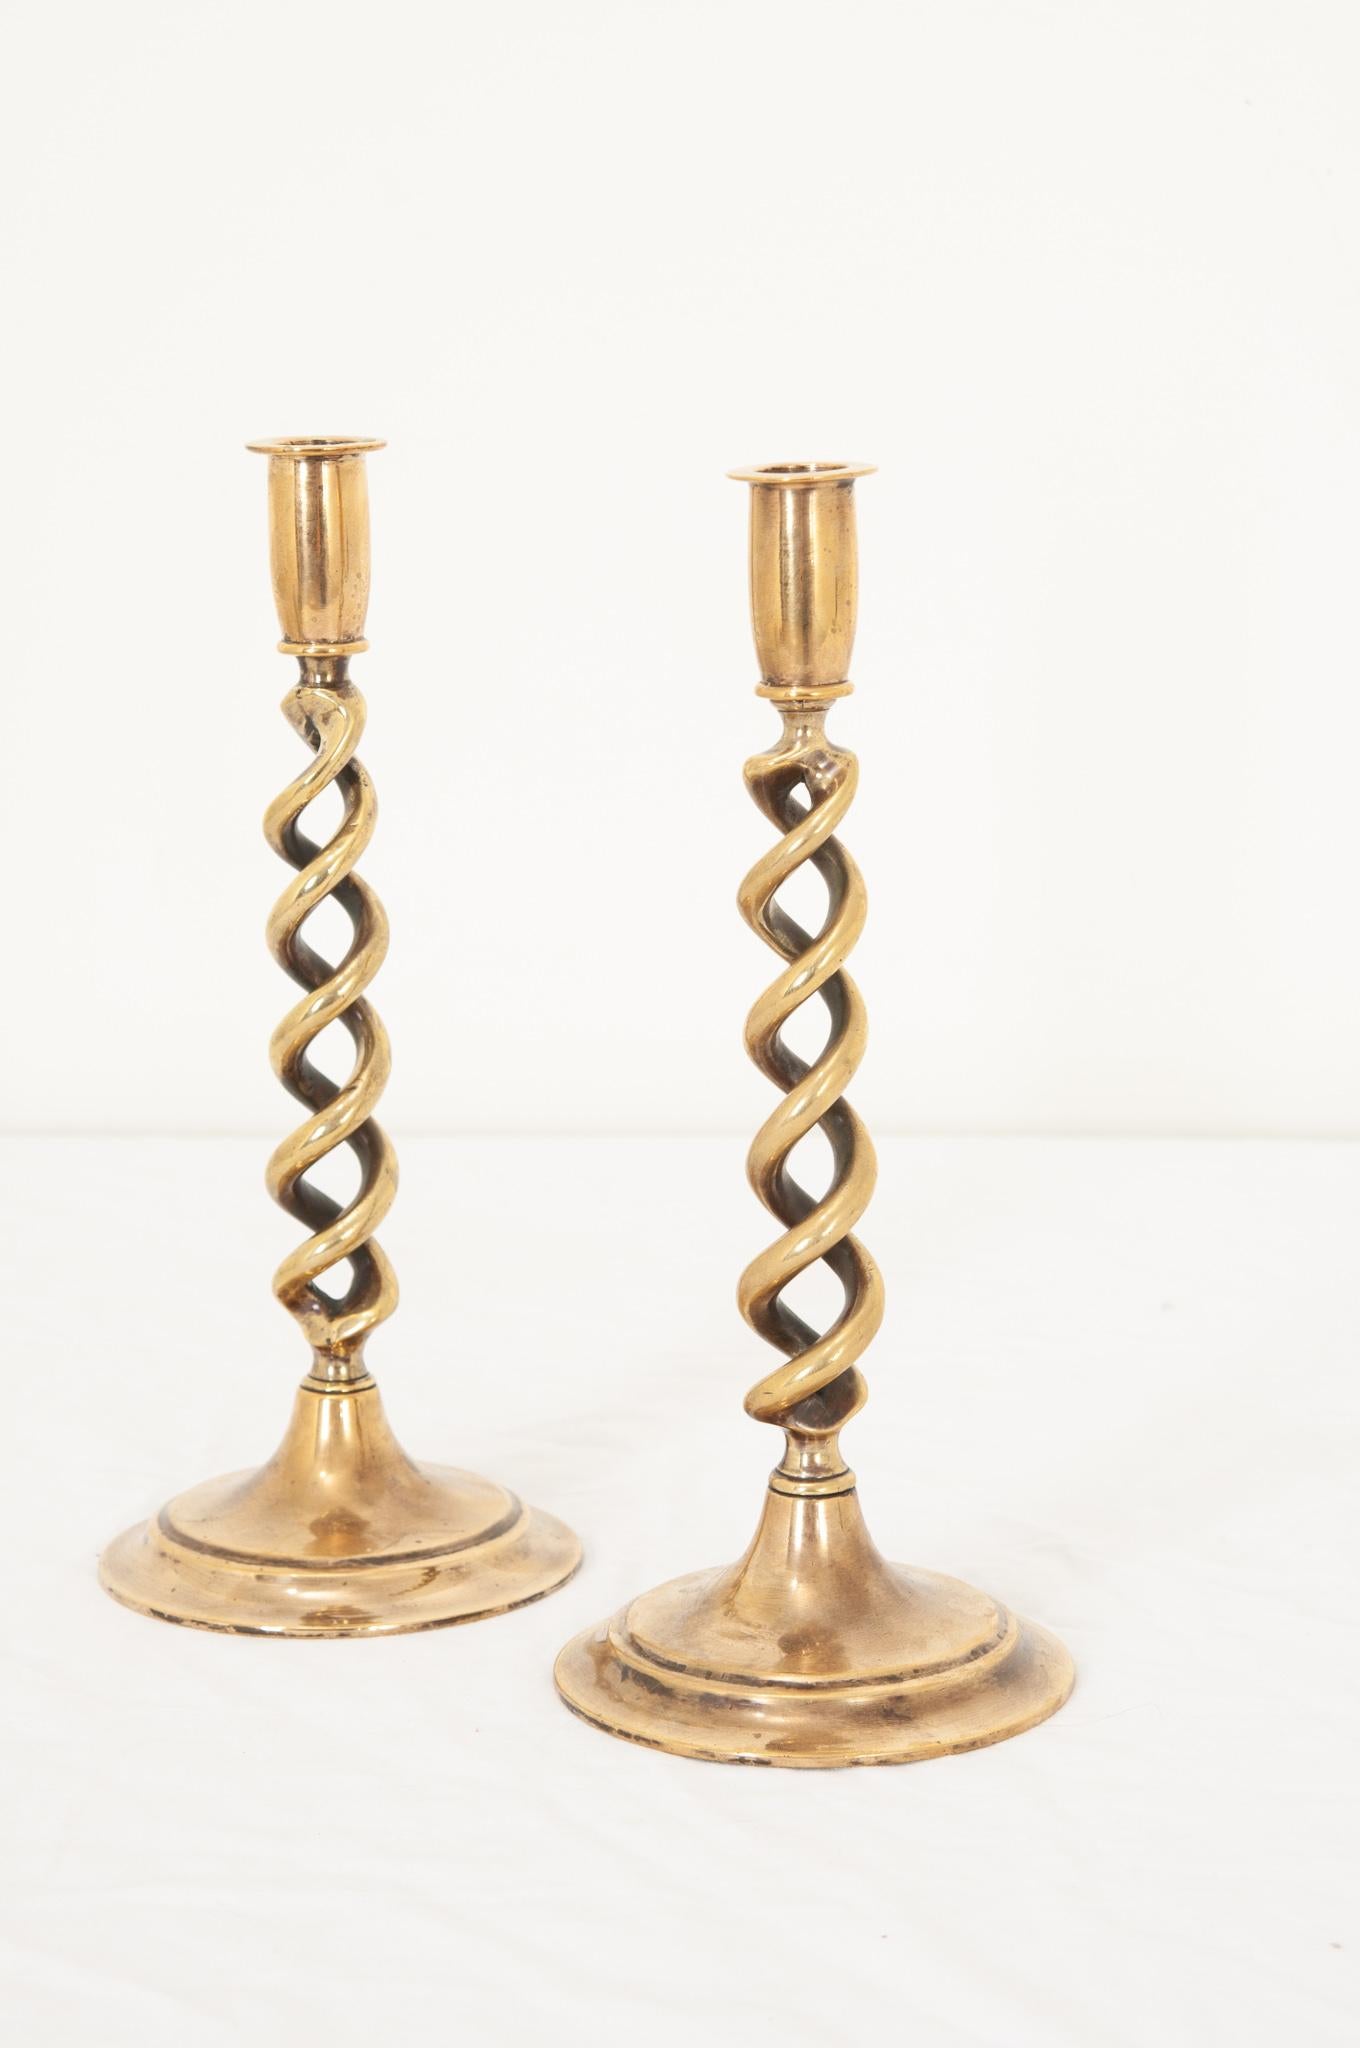 A delightful pair of brass open barley twist candlestick holders hand crafted in England in the 19th century with round circular bases and a lovely aged patina. Quite heavy and of fantastic quality, this pair of candlestick holders will add interest